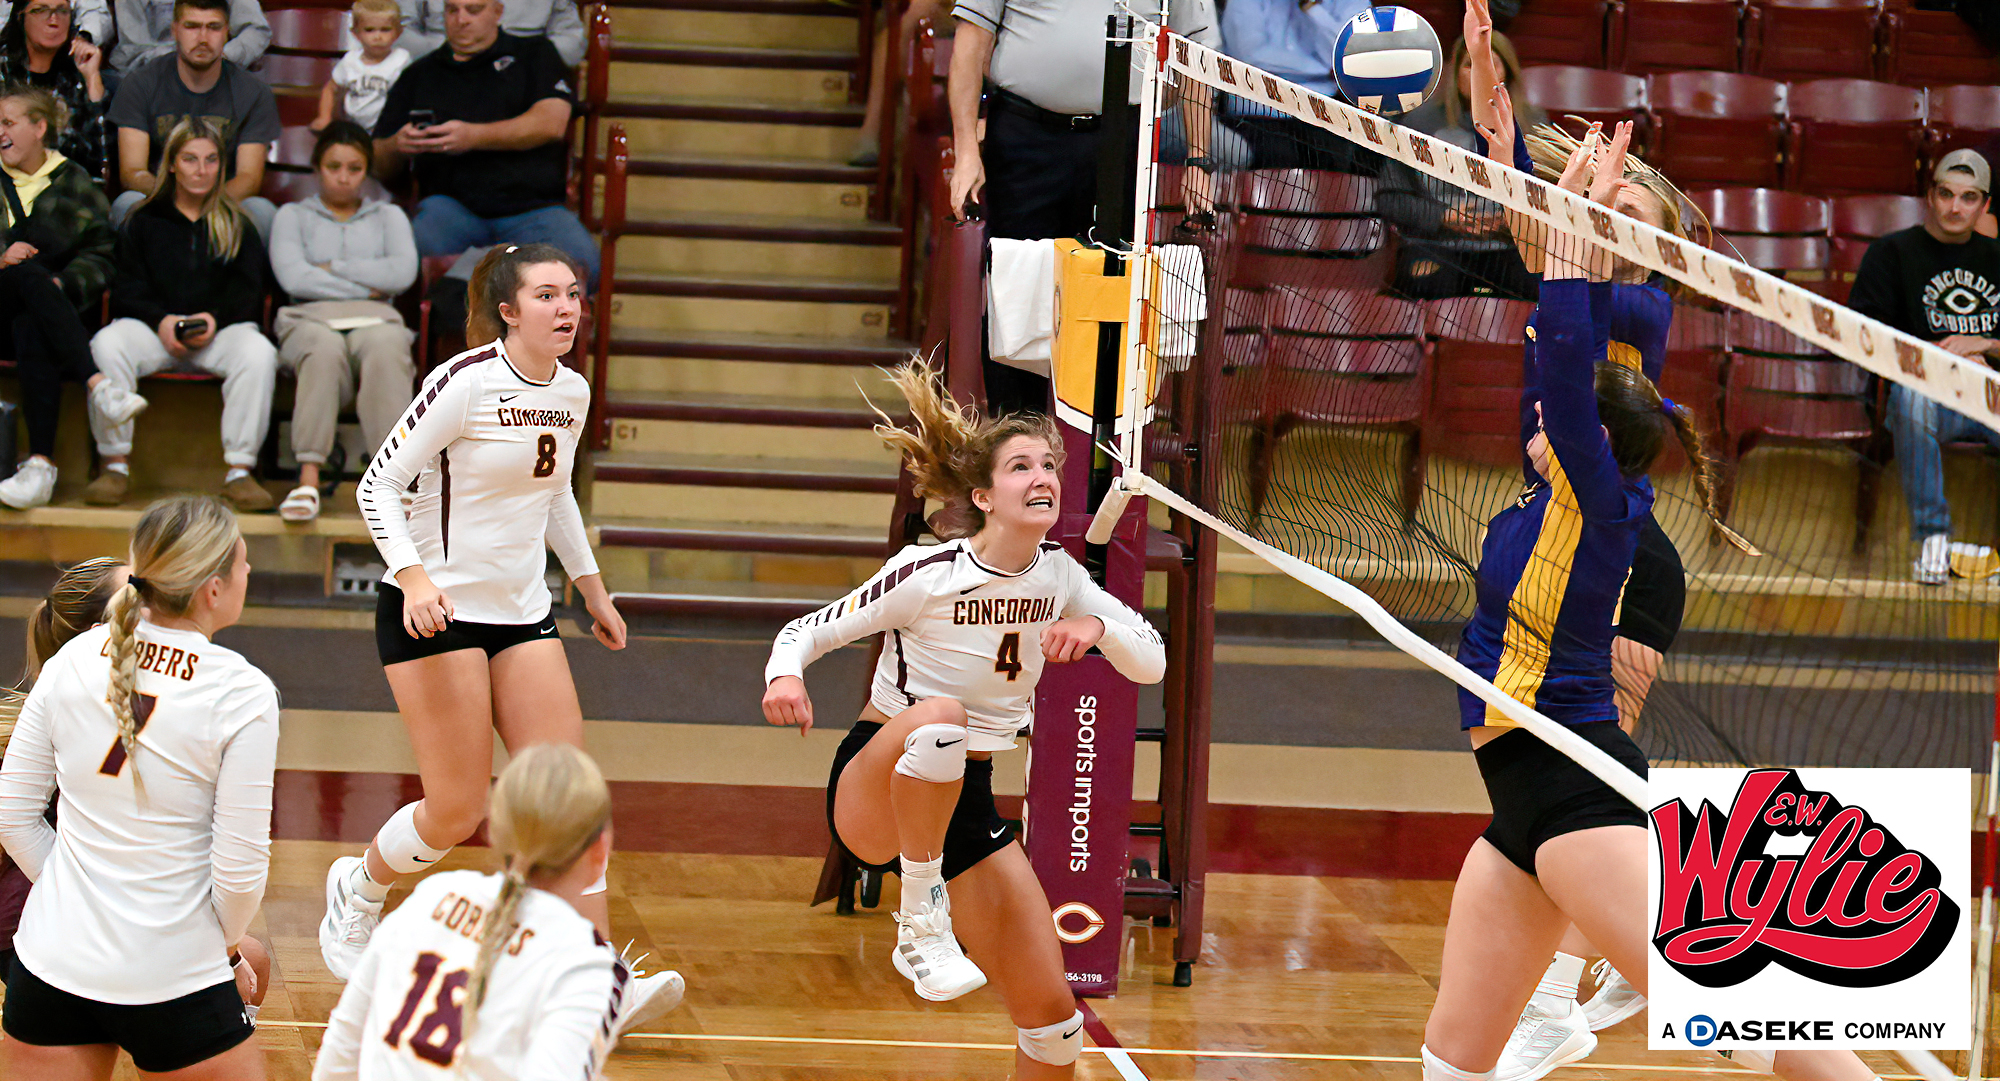 Maria Watt (#4) watches the ball roll over the net for one of her six kills in the Cobbers match against St. Catherine.